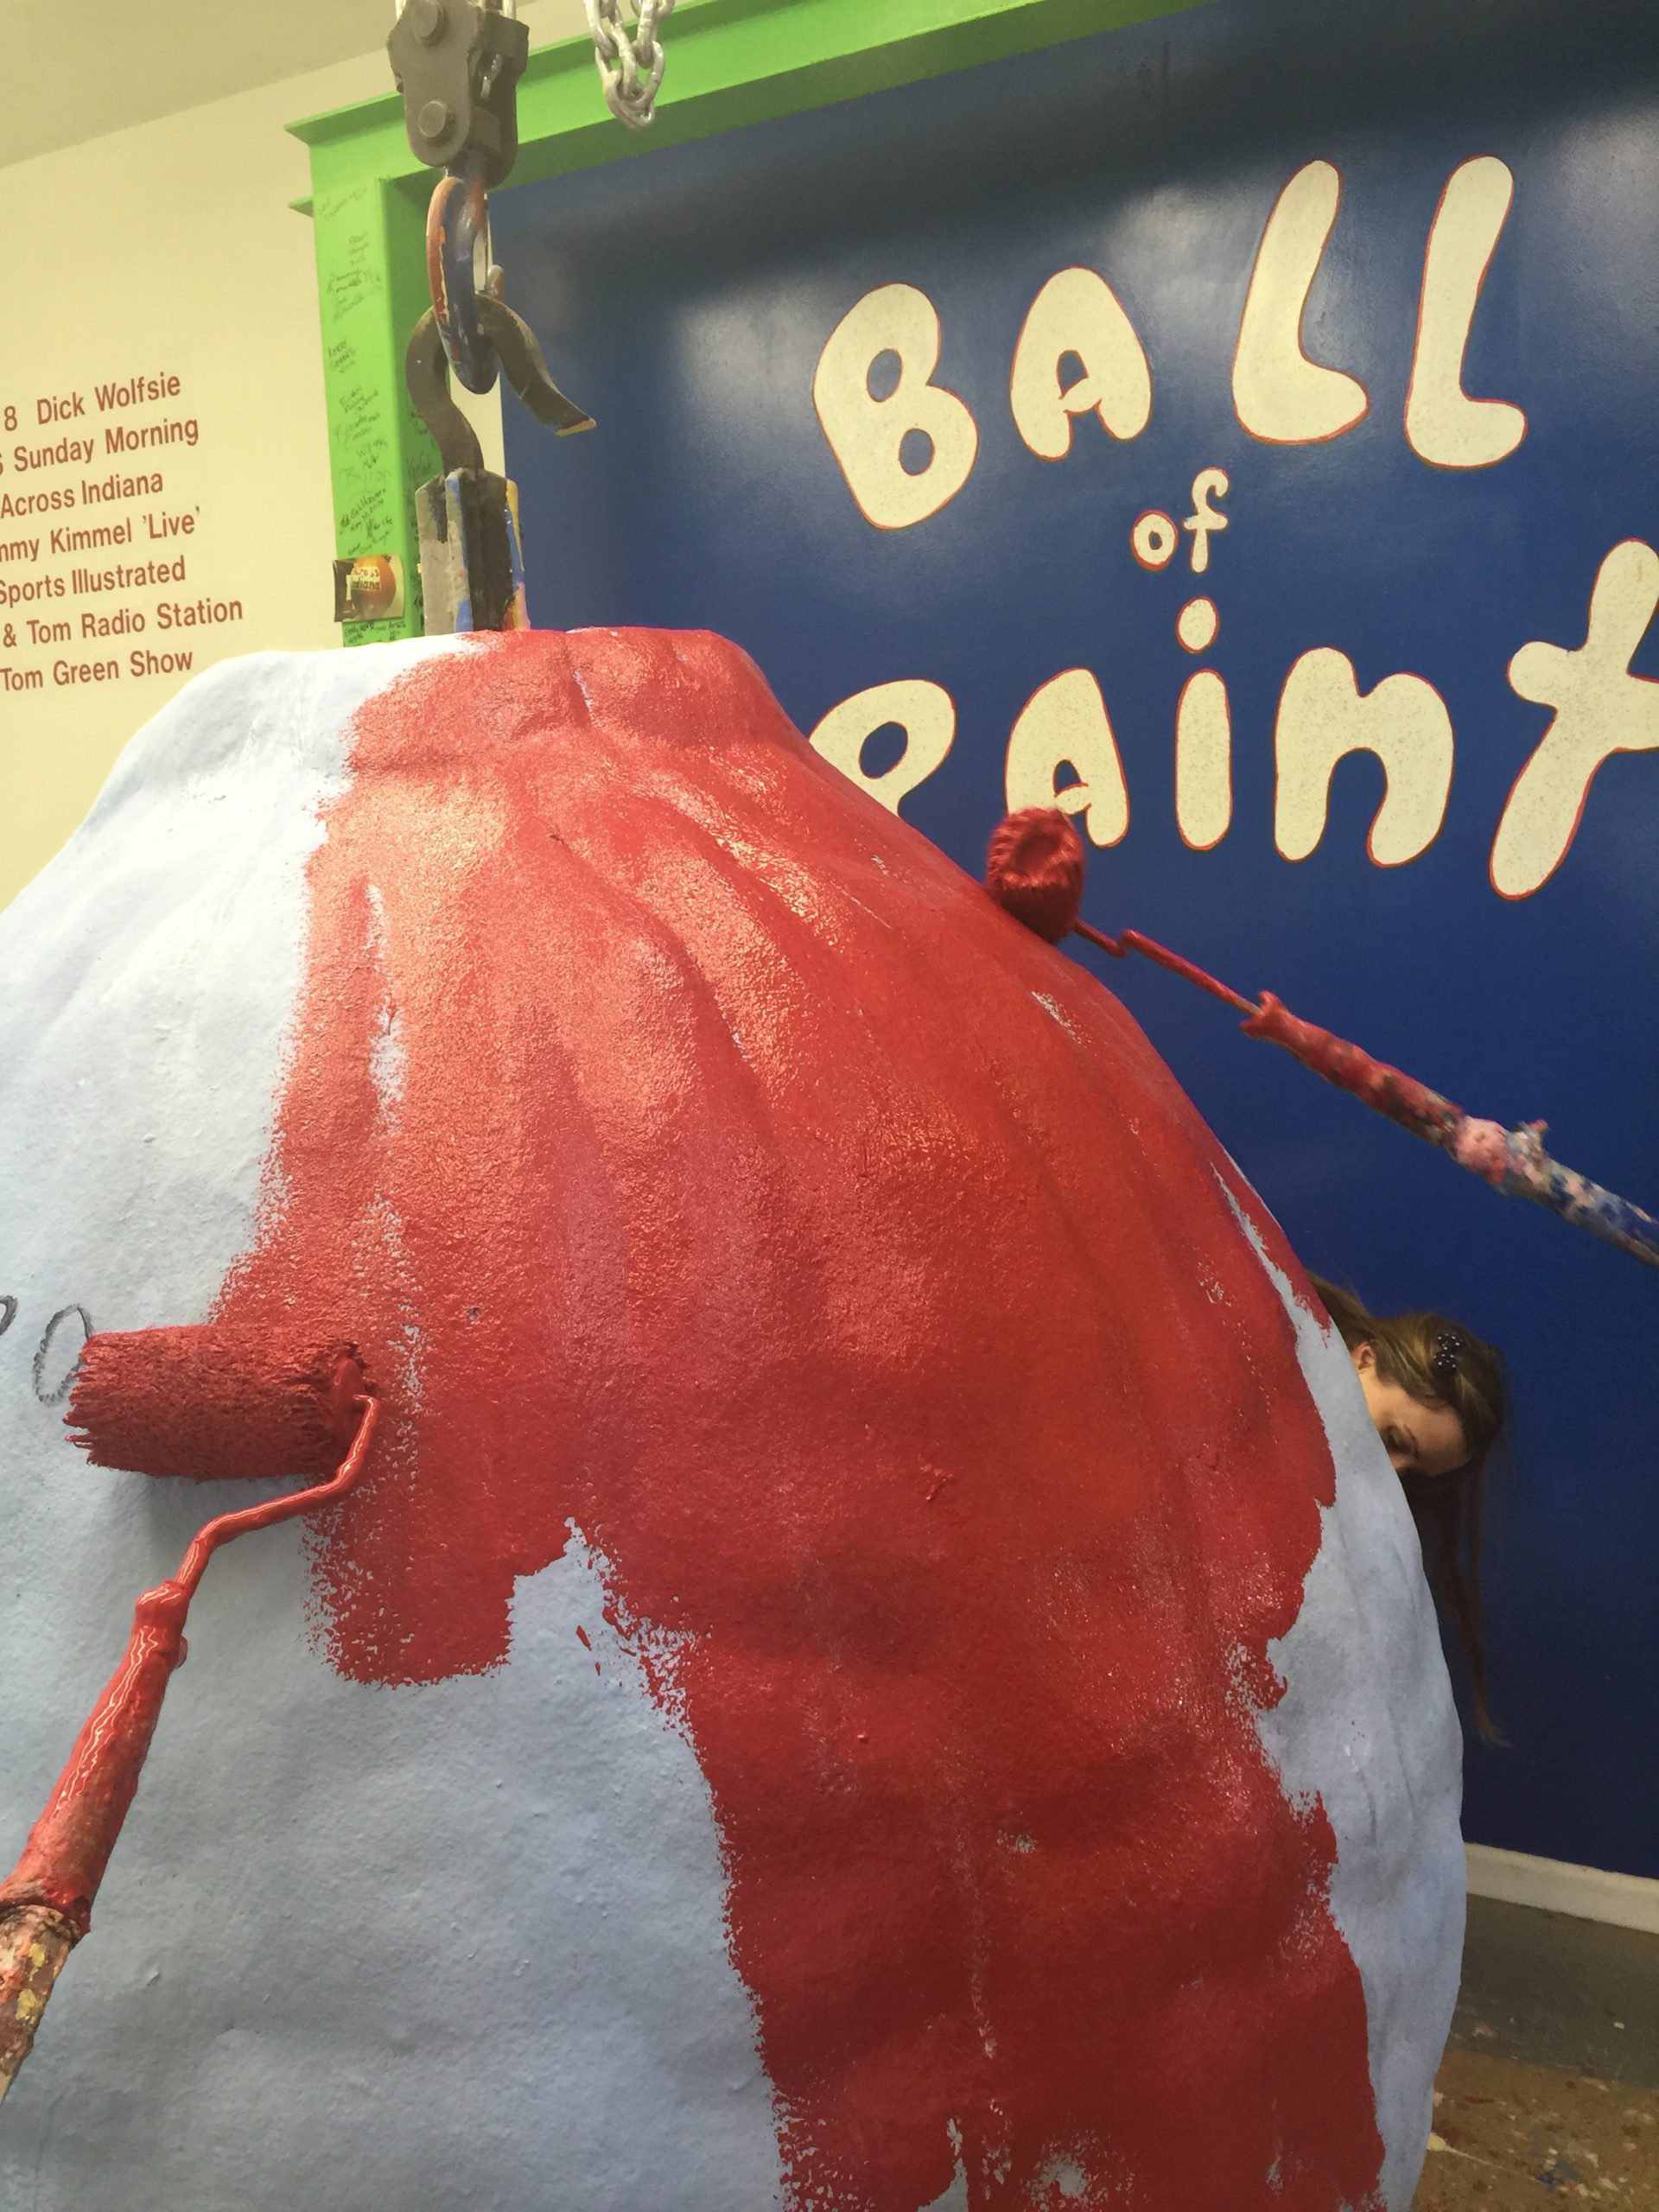 Worlds Largest Ball of Paint